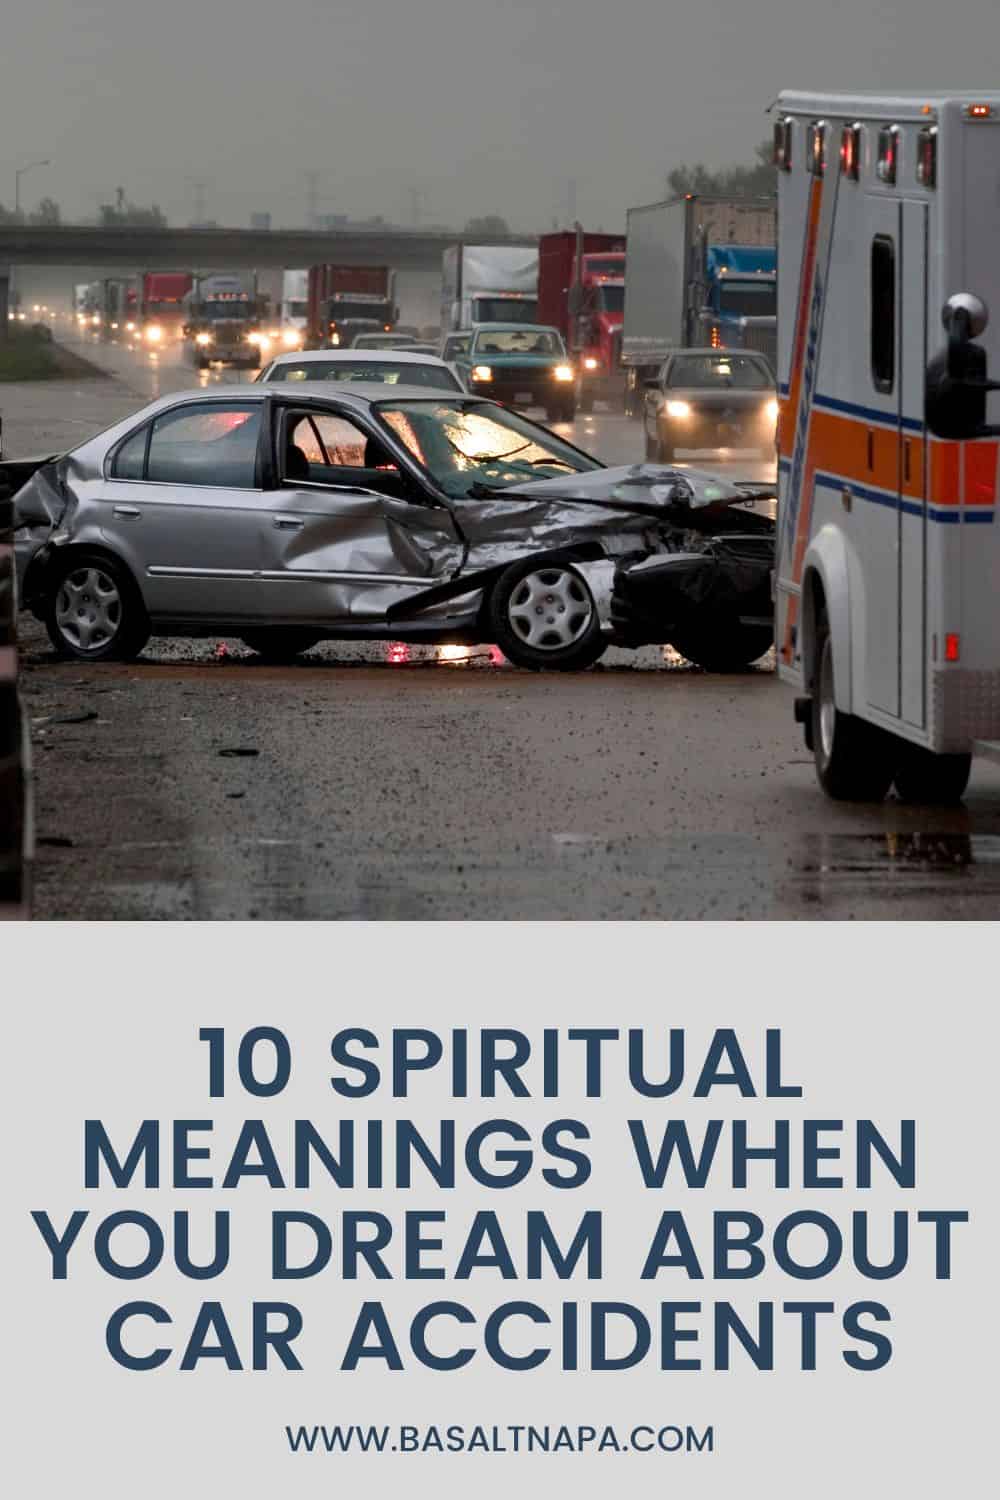 Spiritual Meanings When You Dream About Car Accidents